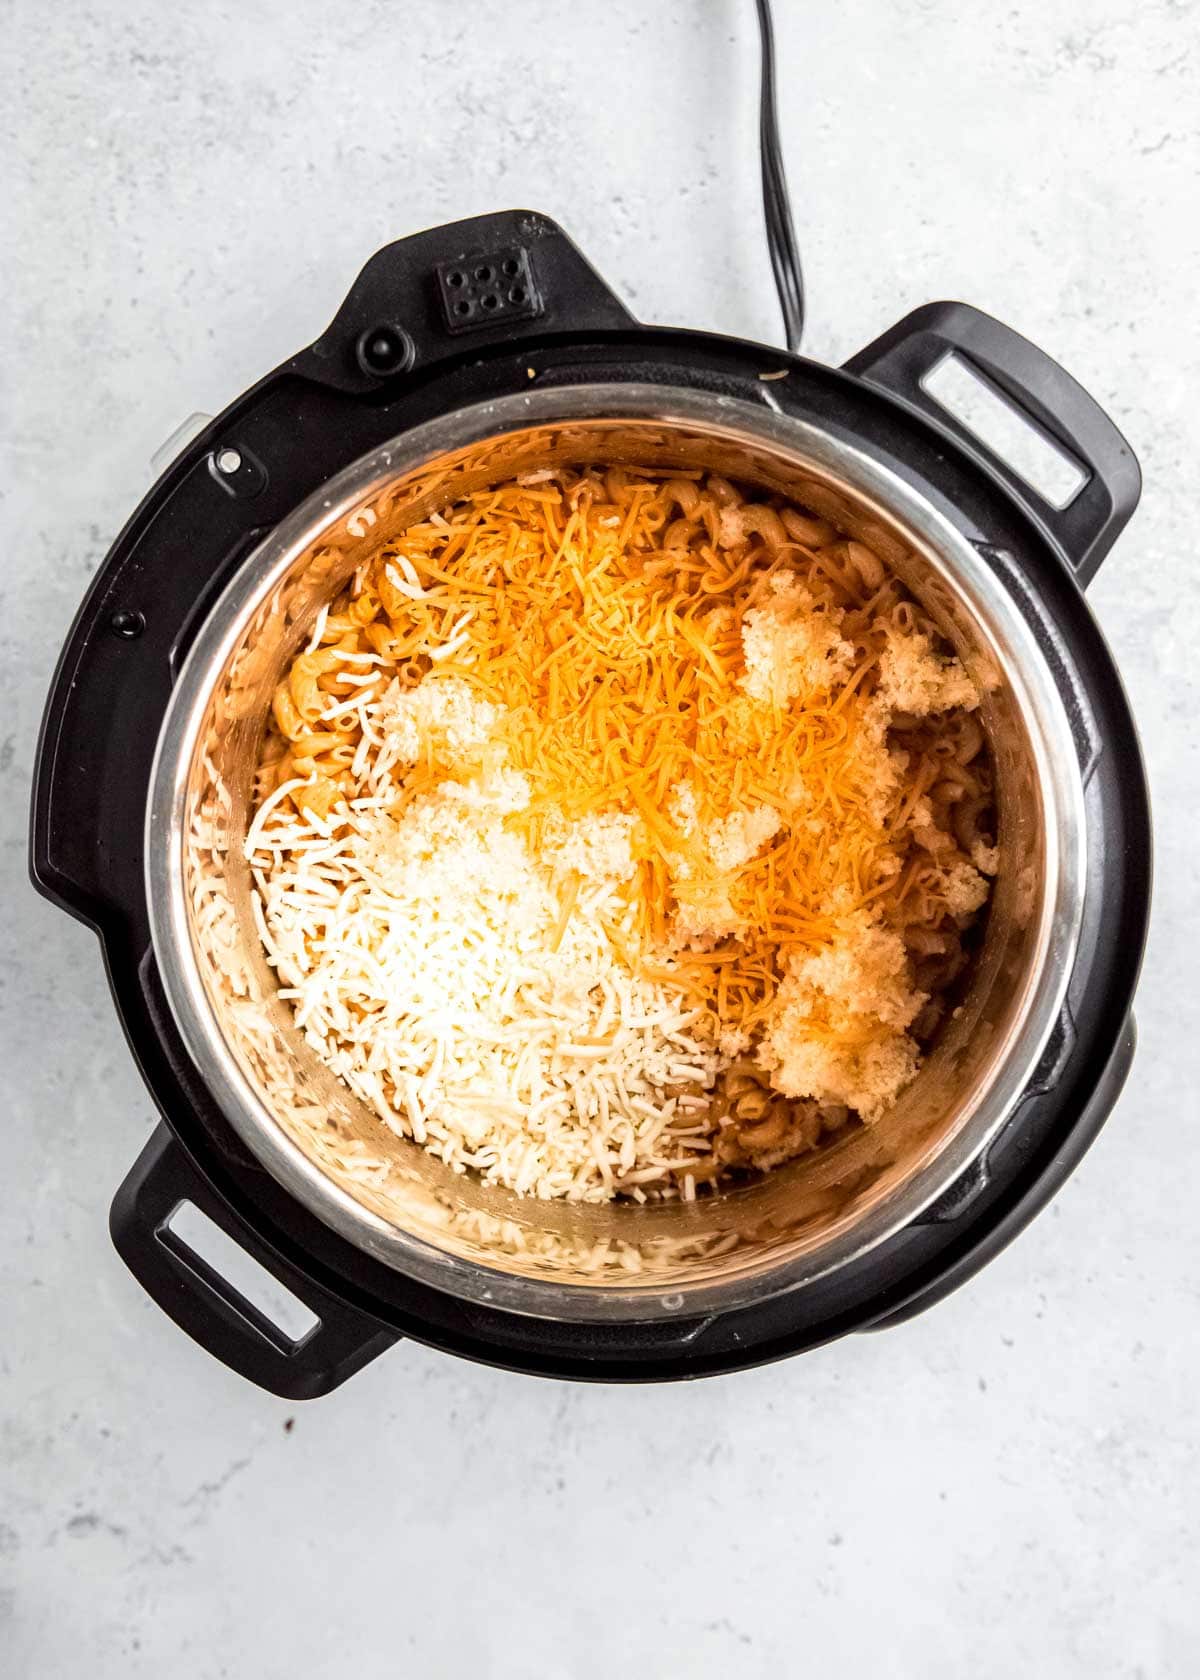 shredded cheese and noodles in instant pot